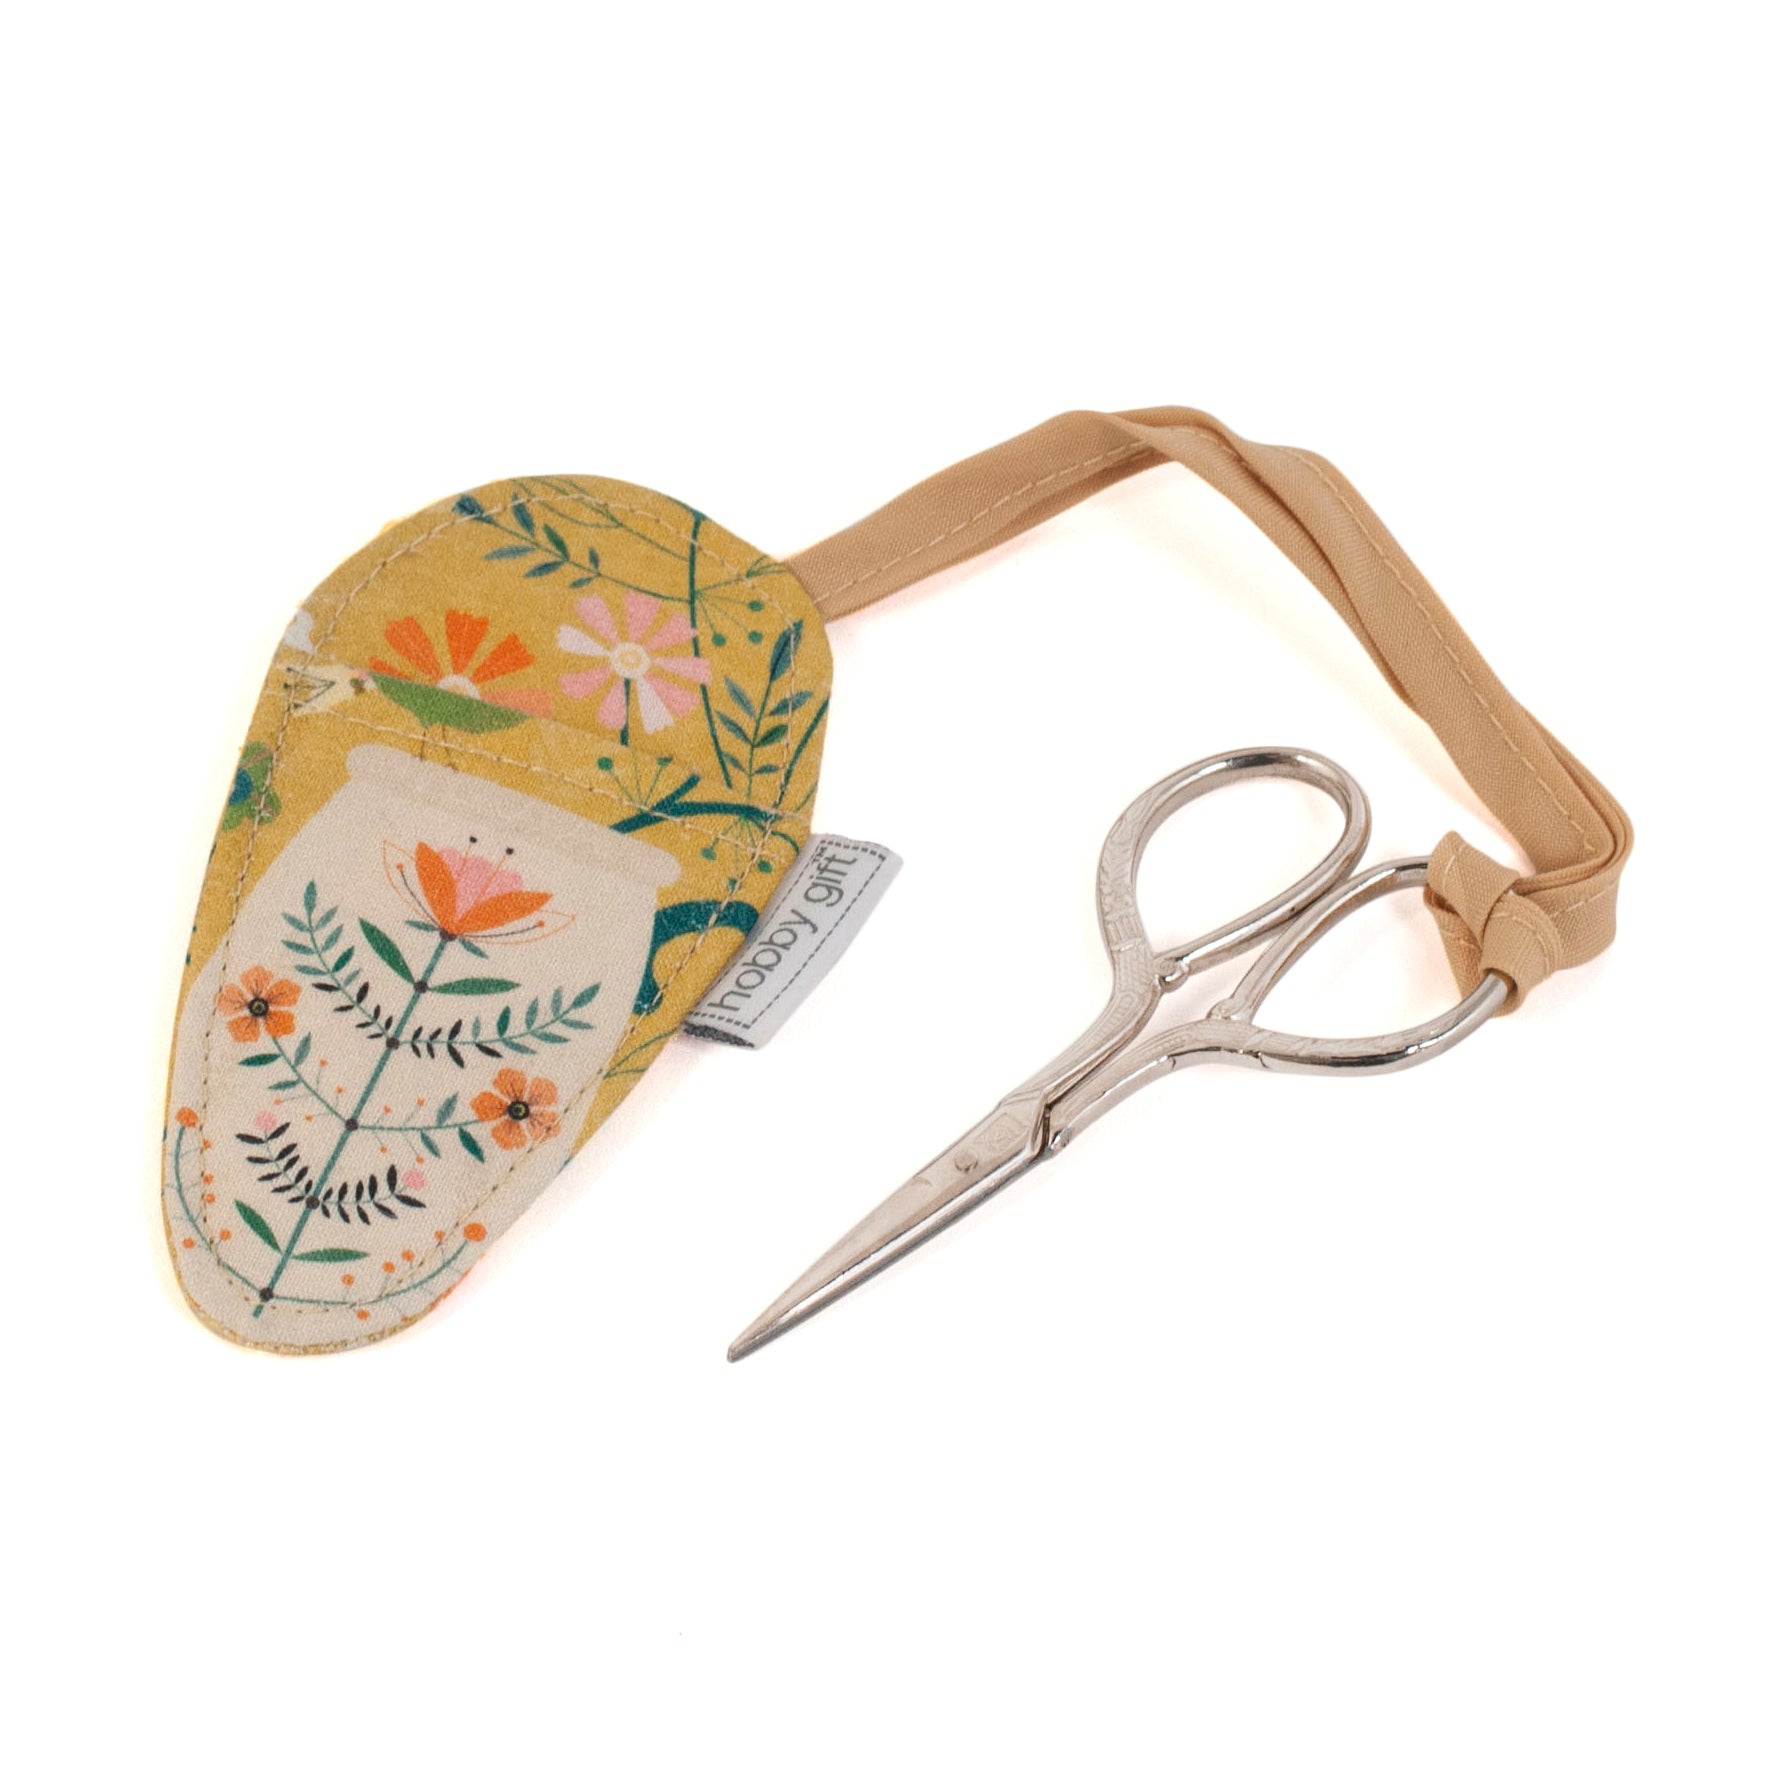 Hedgerow Scissors with Case tribeyarns